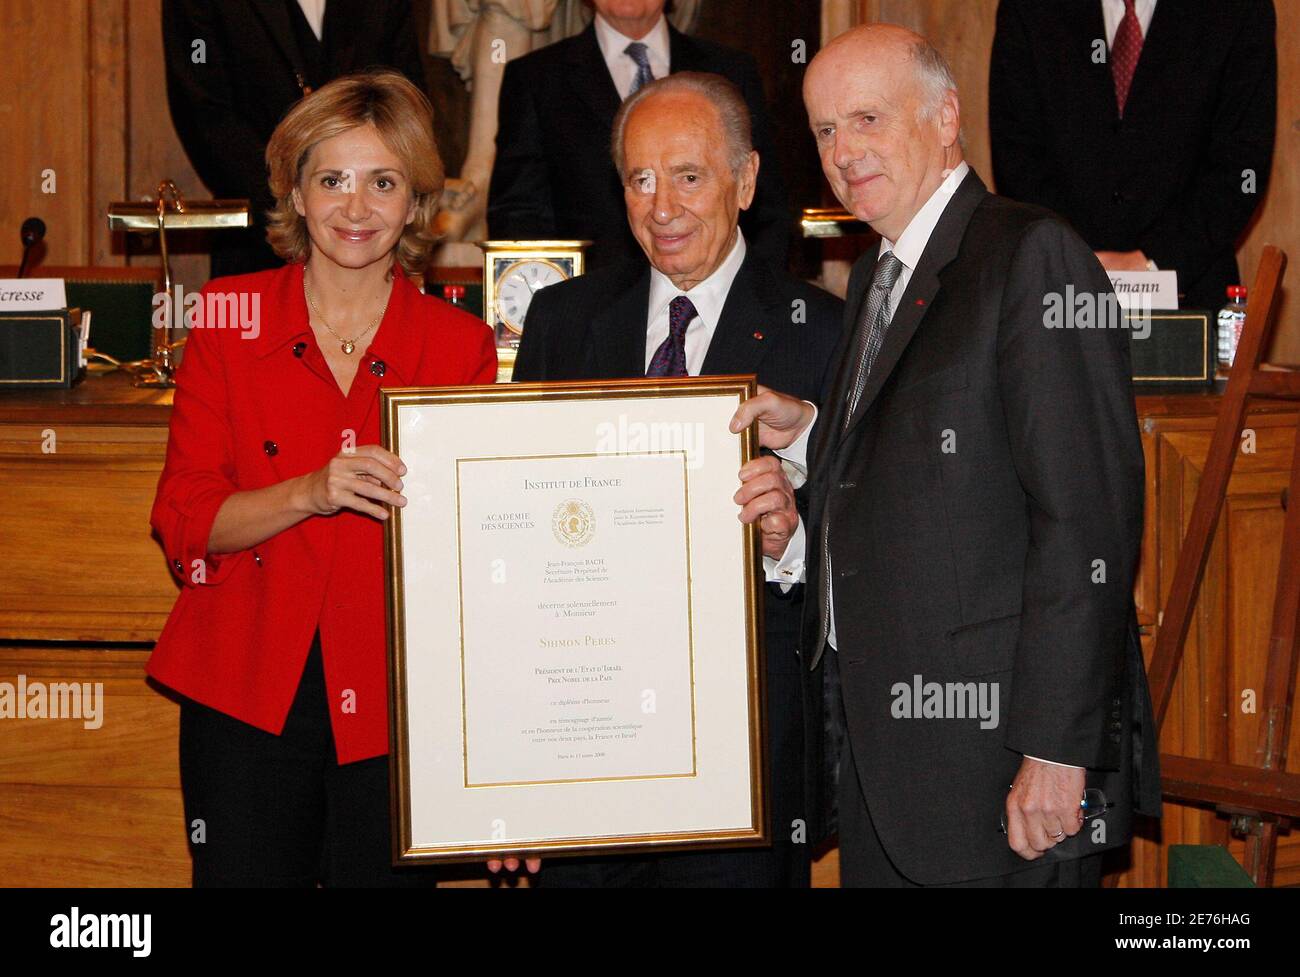 Israel's President Shimon Peres (C) stands between Valerie Pecresse (L),  French Minister for Higher Education and Research and Jean-Francois Bach,  Perpetual Secretary of the Academy of Sciences as he receives a Honour